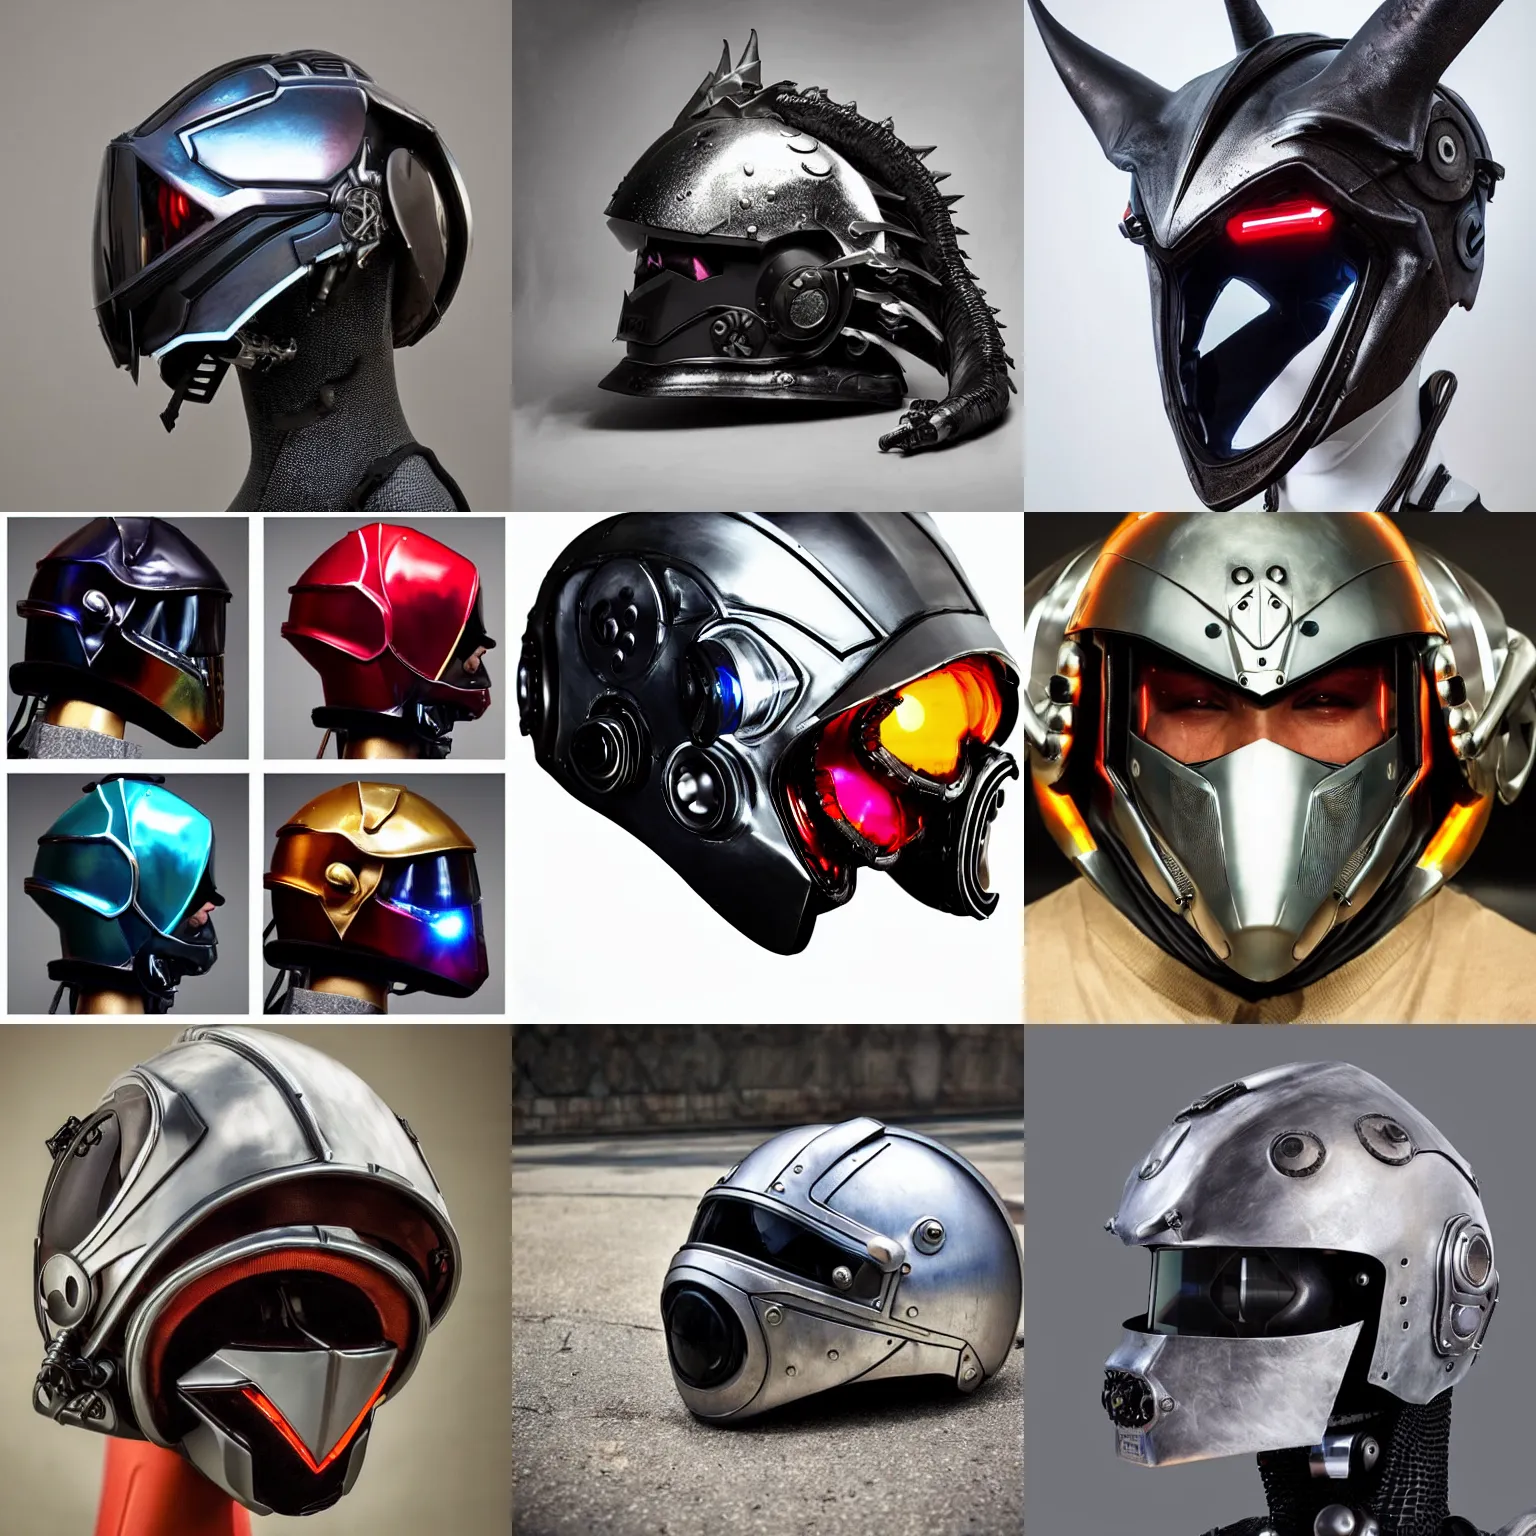 Prompt: award winning cosplay photo of a motorcycle helmet, cyberpunk, robotic futuristic dragon themed helmet, sony produced, techwear, chrome, cyber, very cool, large horns, aesthetic, helmet, dragon, dragon shaped helmet, cybernetic, cyberpunk, fantasy scifi dragon designed by